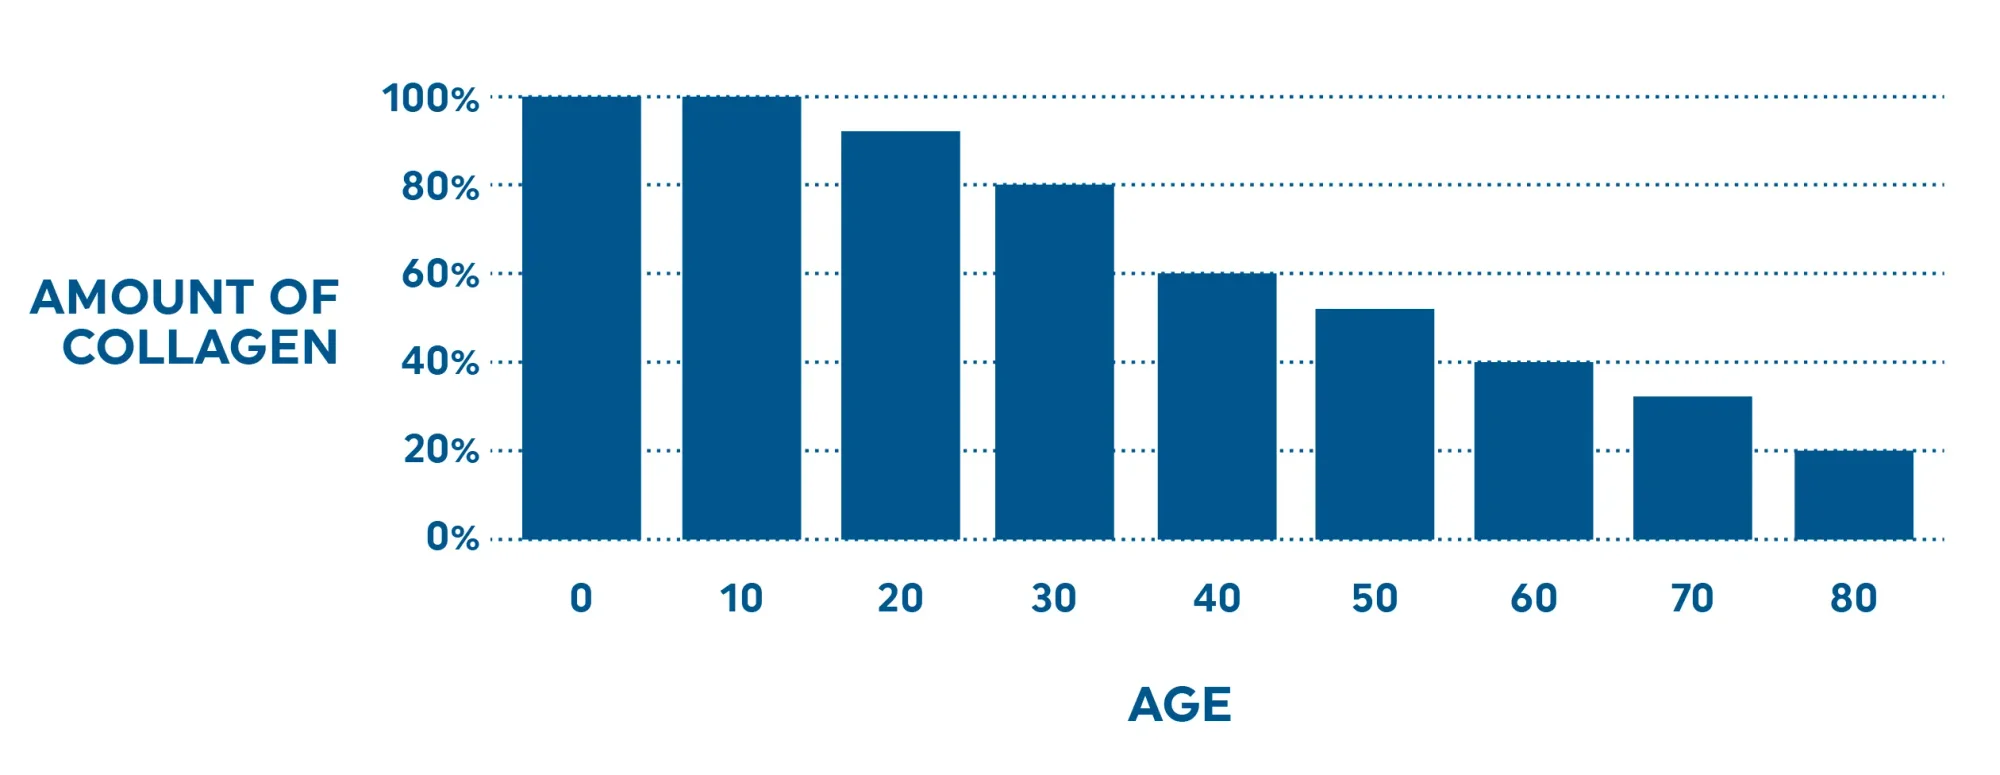 Amount of Collagen Decline with Age